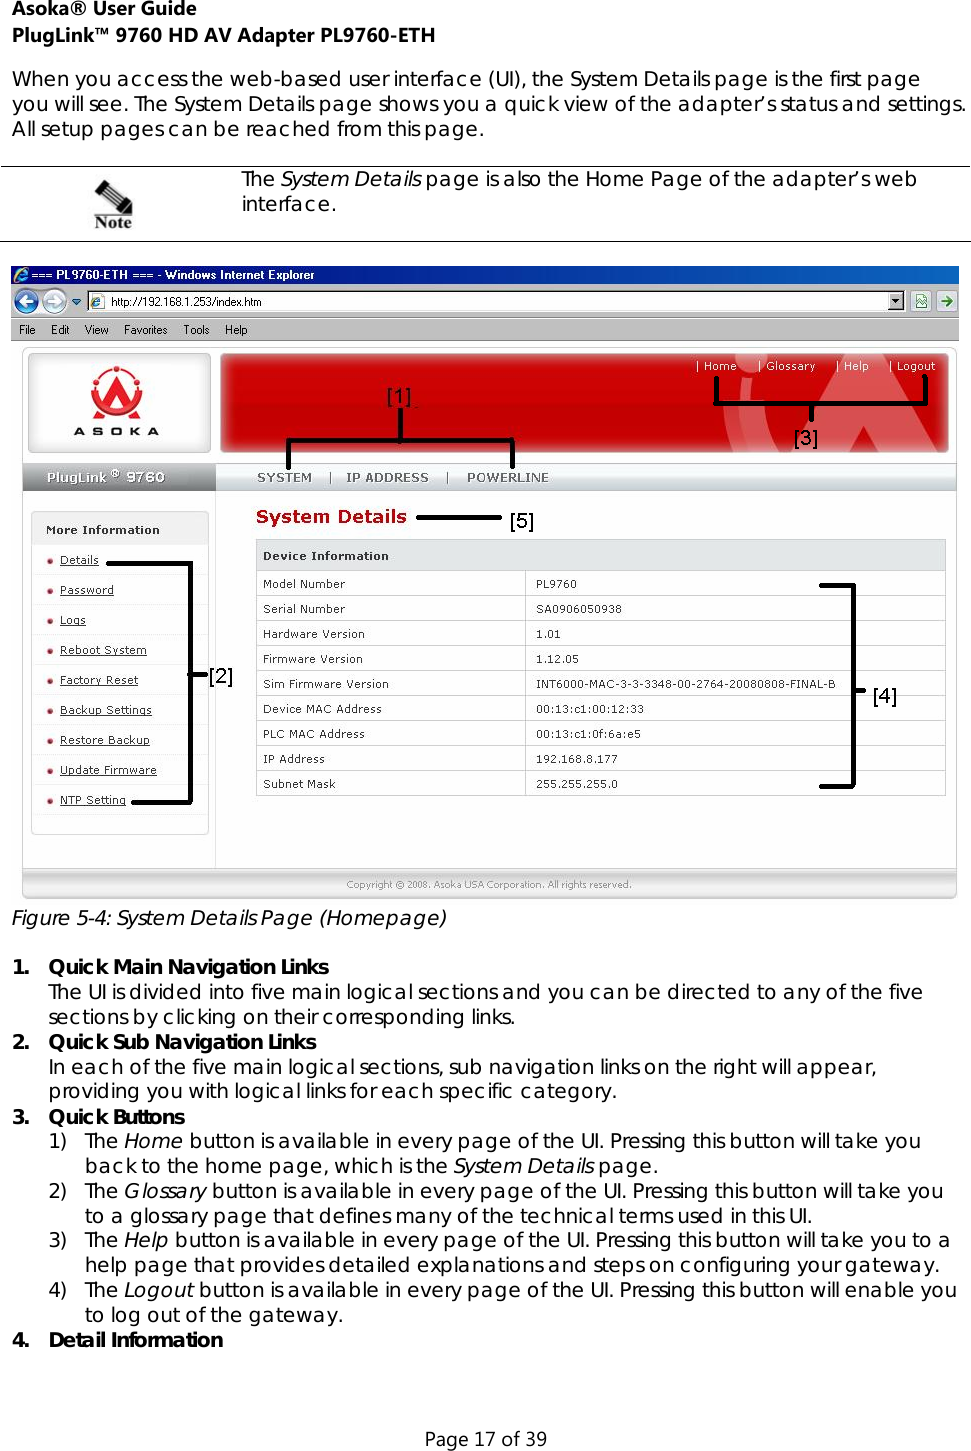 Asoka® User Guide  PlugLink™ 9760 HD AV Adapter PL9760-ETH Page 17 of 39 When you access the web-based user interface (UI), the System Details page is the first page you will see. The System Details page shows you a quick view of the adapter’s status and settings. All setup pages can be reached from this page.   The System Details page is also the Home Page of the adapter’s web interface.    Figure 5-4: System Details Page (Homepage)   1. Quick Main Navigation Links The UI is divided into five main logical sections and you can be directed to any of the five sections by clicking on their corresponding links. 2. Quick Sub Navigation Links In each of the five main logical sections, sub navigation links on the right will appear, providing you with logical links for each specific category. 3. Quick Buttons 1) The Home button is available in every page of the UI. Pressing this button will take you back to the home page, which is the System Details page. 2) The Glossary button is available in every page of the UI. Pressing this button will take you to a glossary page that defines many of the technical terms used in this UI. 3) The Help button is available in every page of the UI. Pressing this button will take you to a help page that provides detailed explanations and steps on configuring your gateway.  4) The Logout button is available in every page of the UI. Pressing this button will enable you to log out of the gateway.  4. Detail Information  